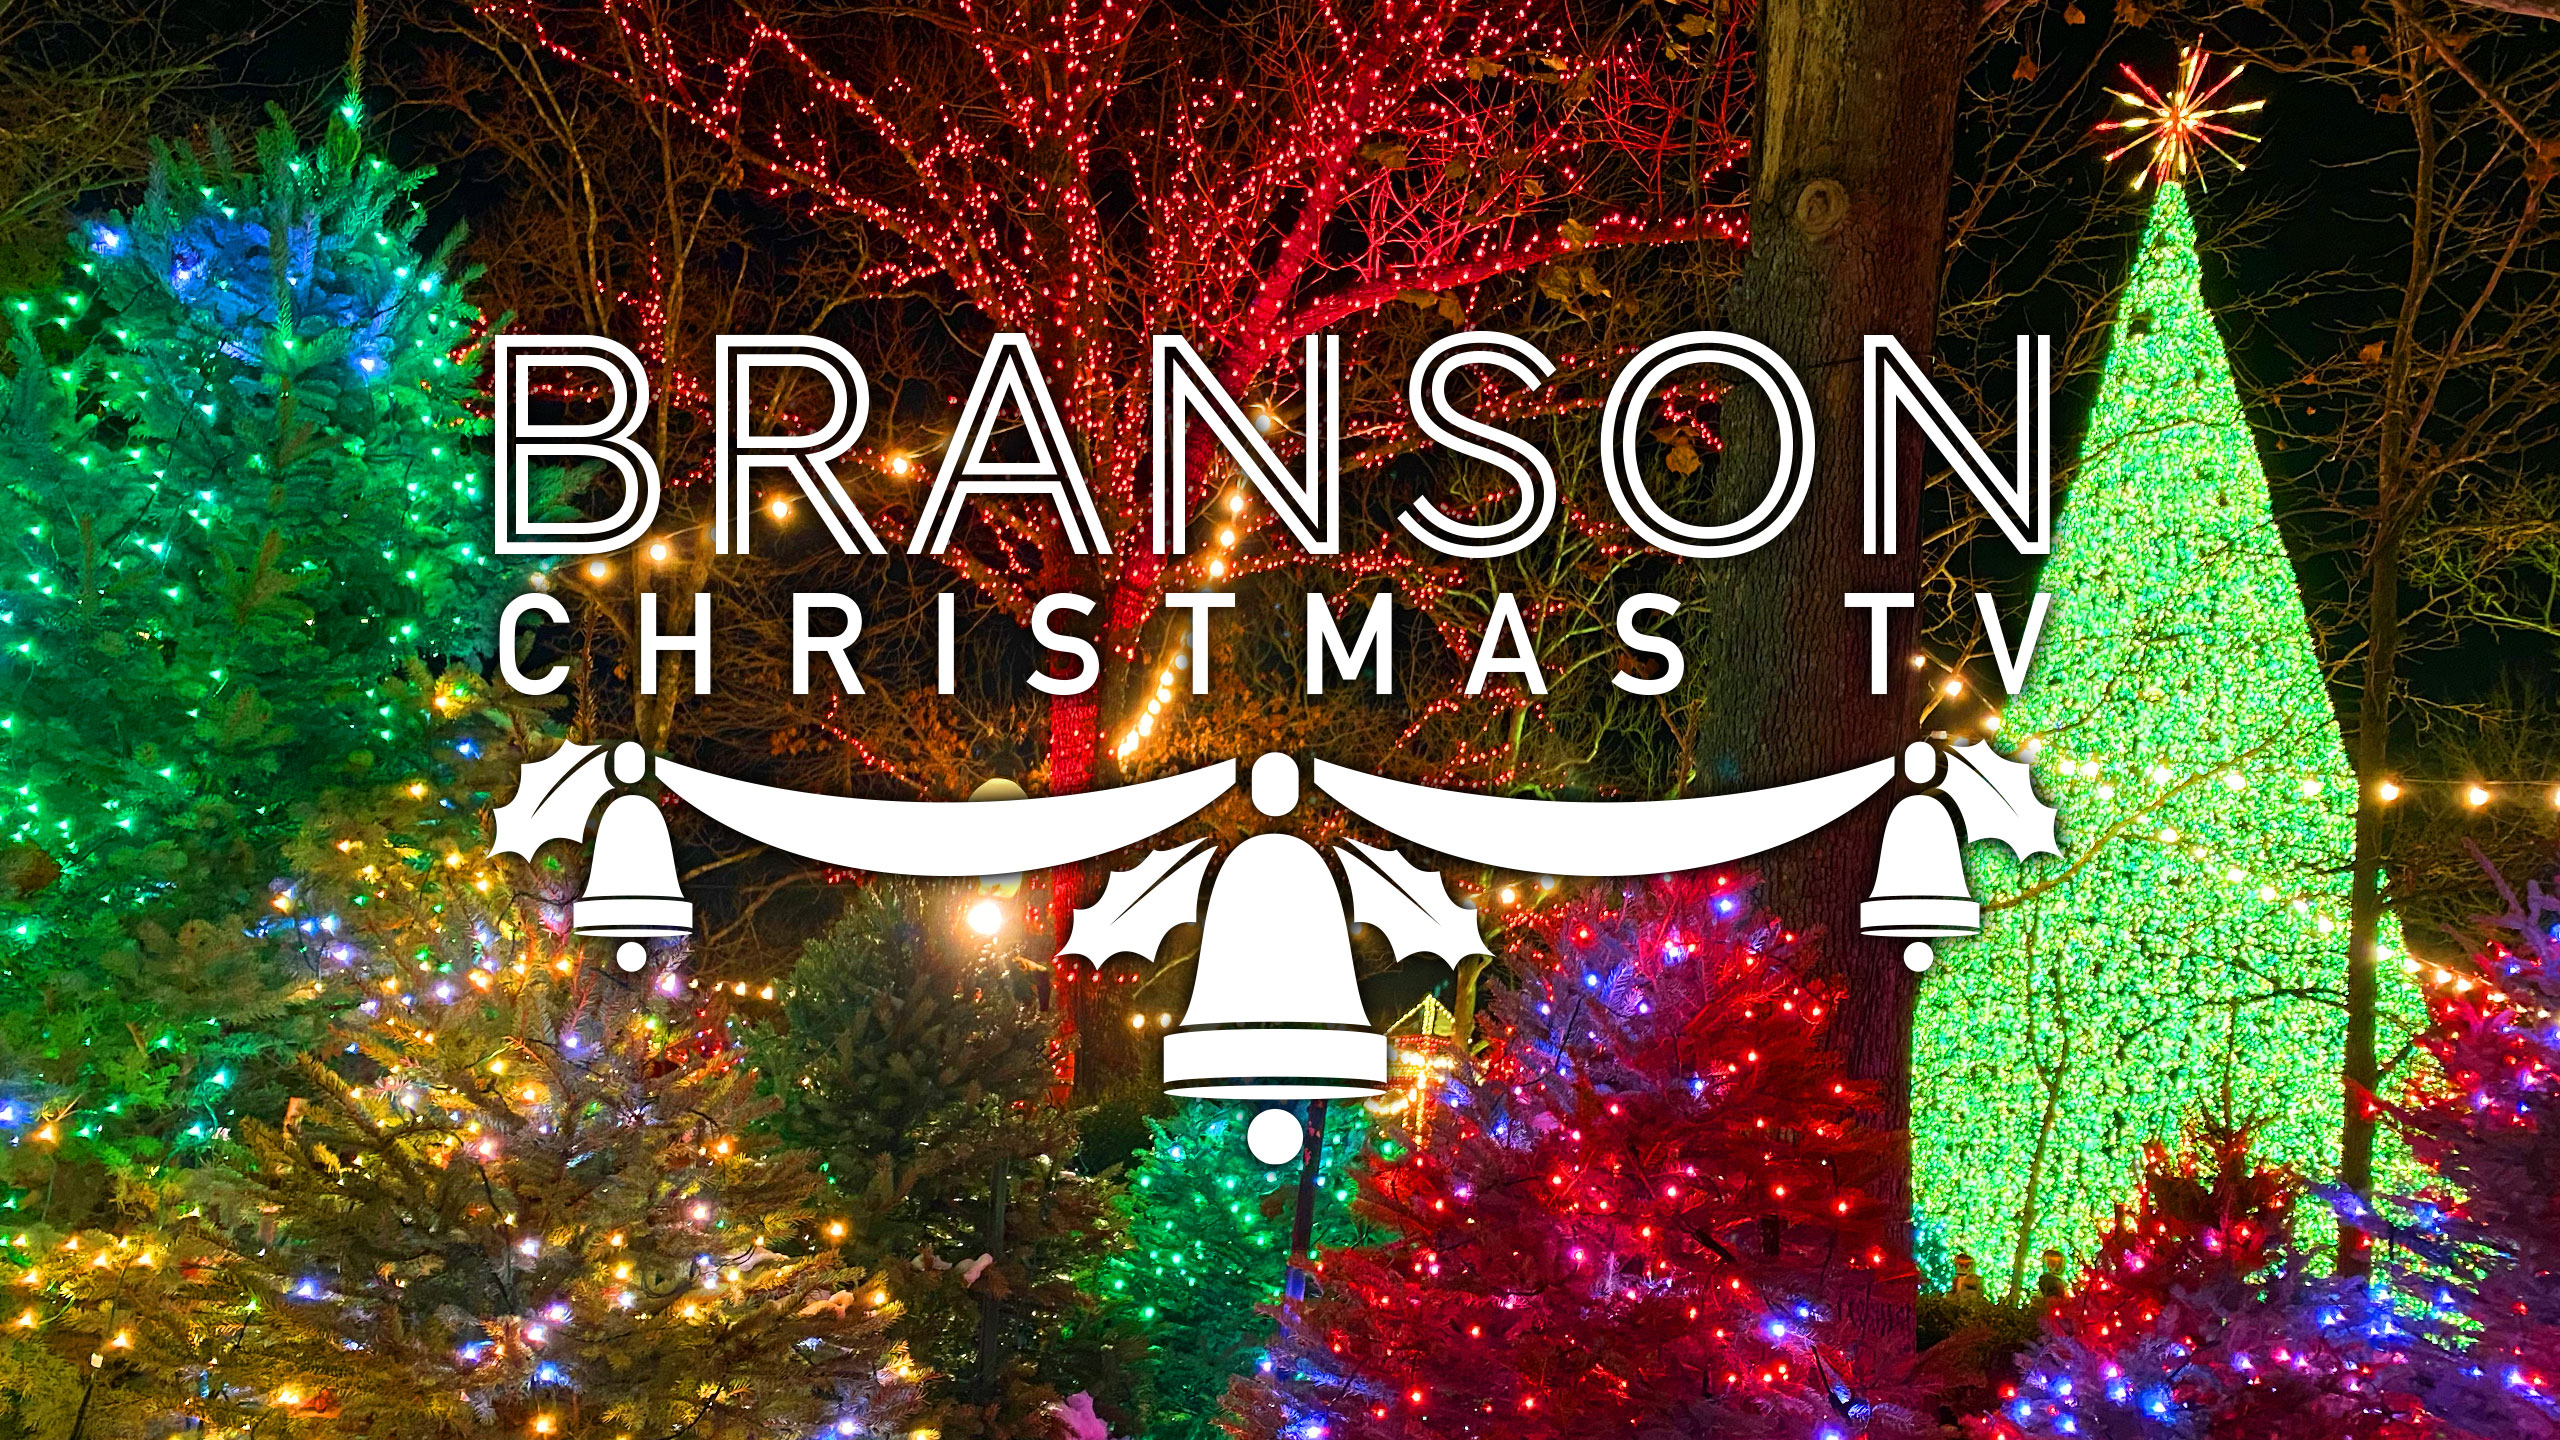 Take a virtual tour of Branson Christmas lights and attractions